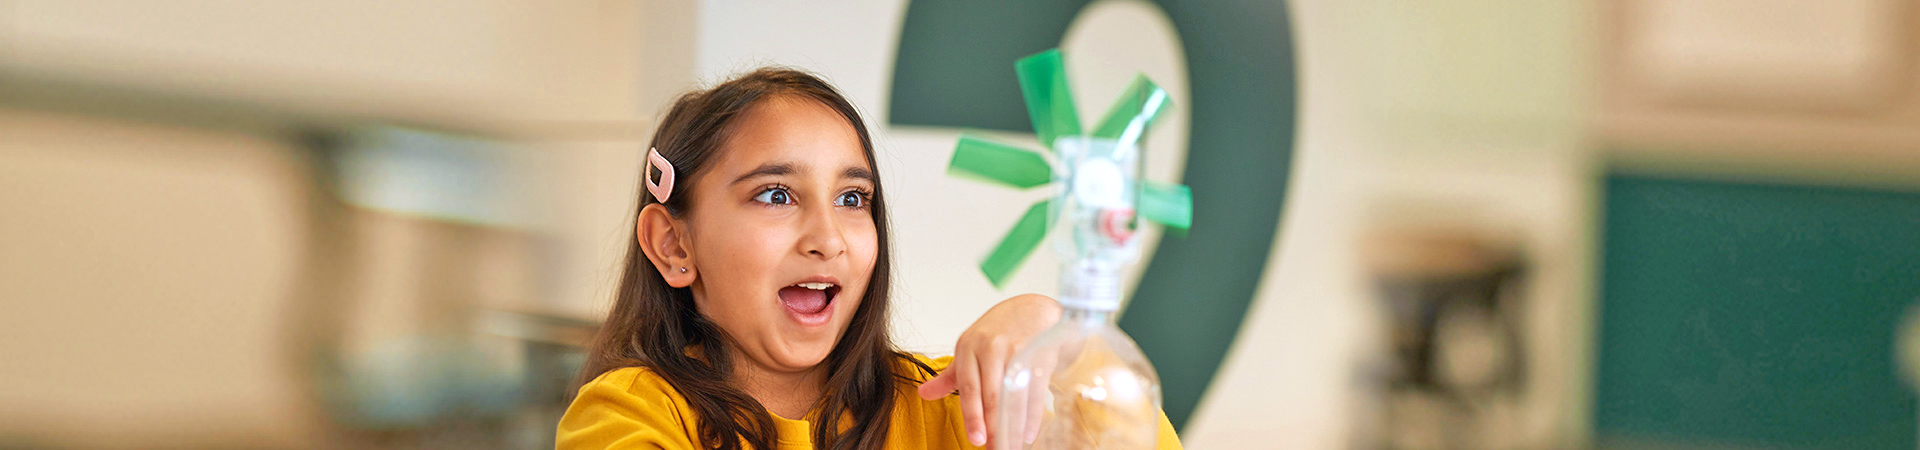  a young girl smiling at her stem propeller science experiment 